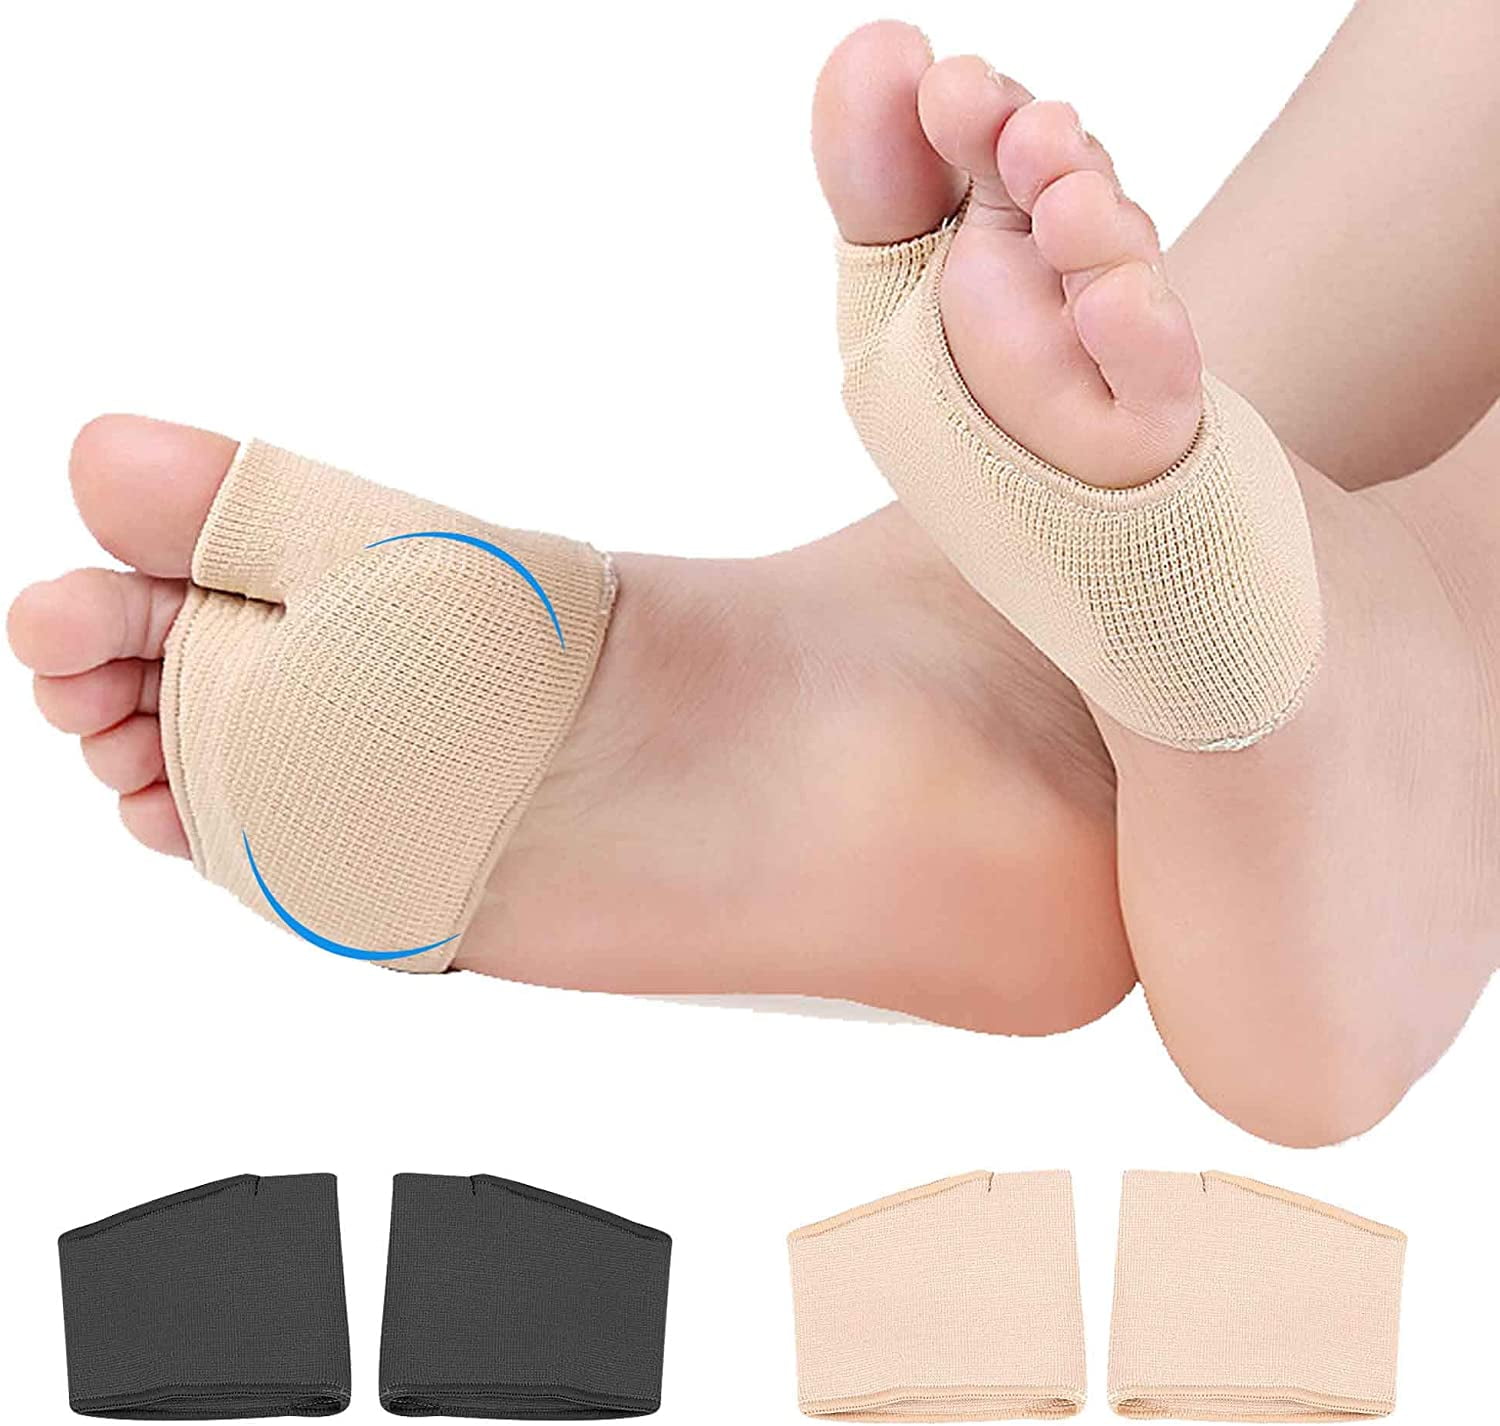 6 Pieces - Soft Gel Insole Metatarsal Pads Shoe Inserts Mortons Neuroma Callus Metatarsal Foot Pain Relief Bunion Forefoot Cushioning 3 Pairs Ball of Foot Cushions for Women High Heel 